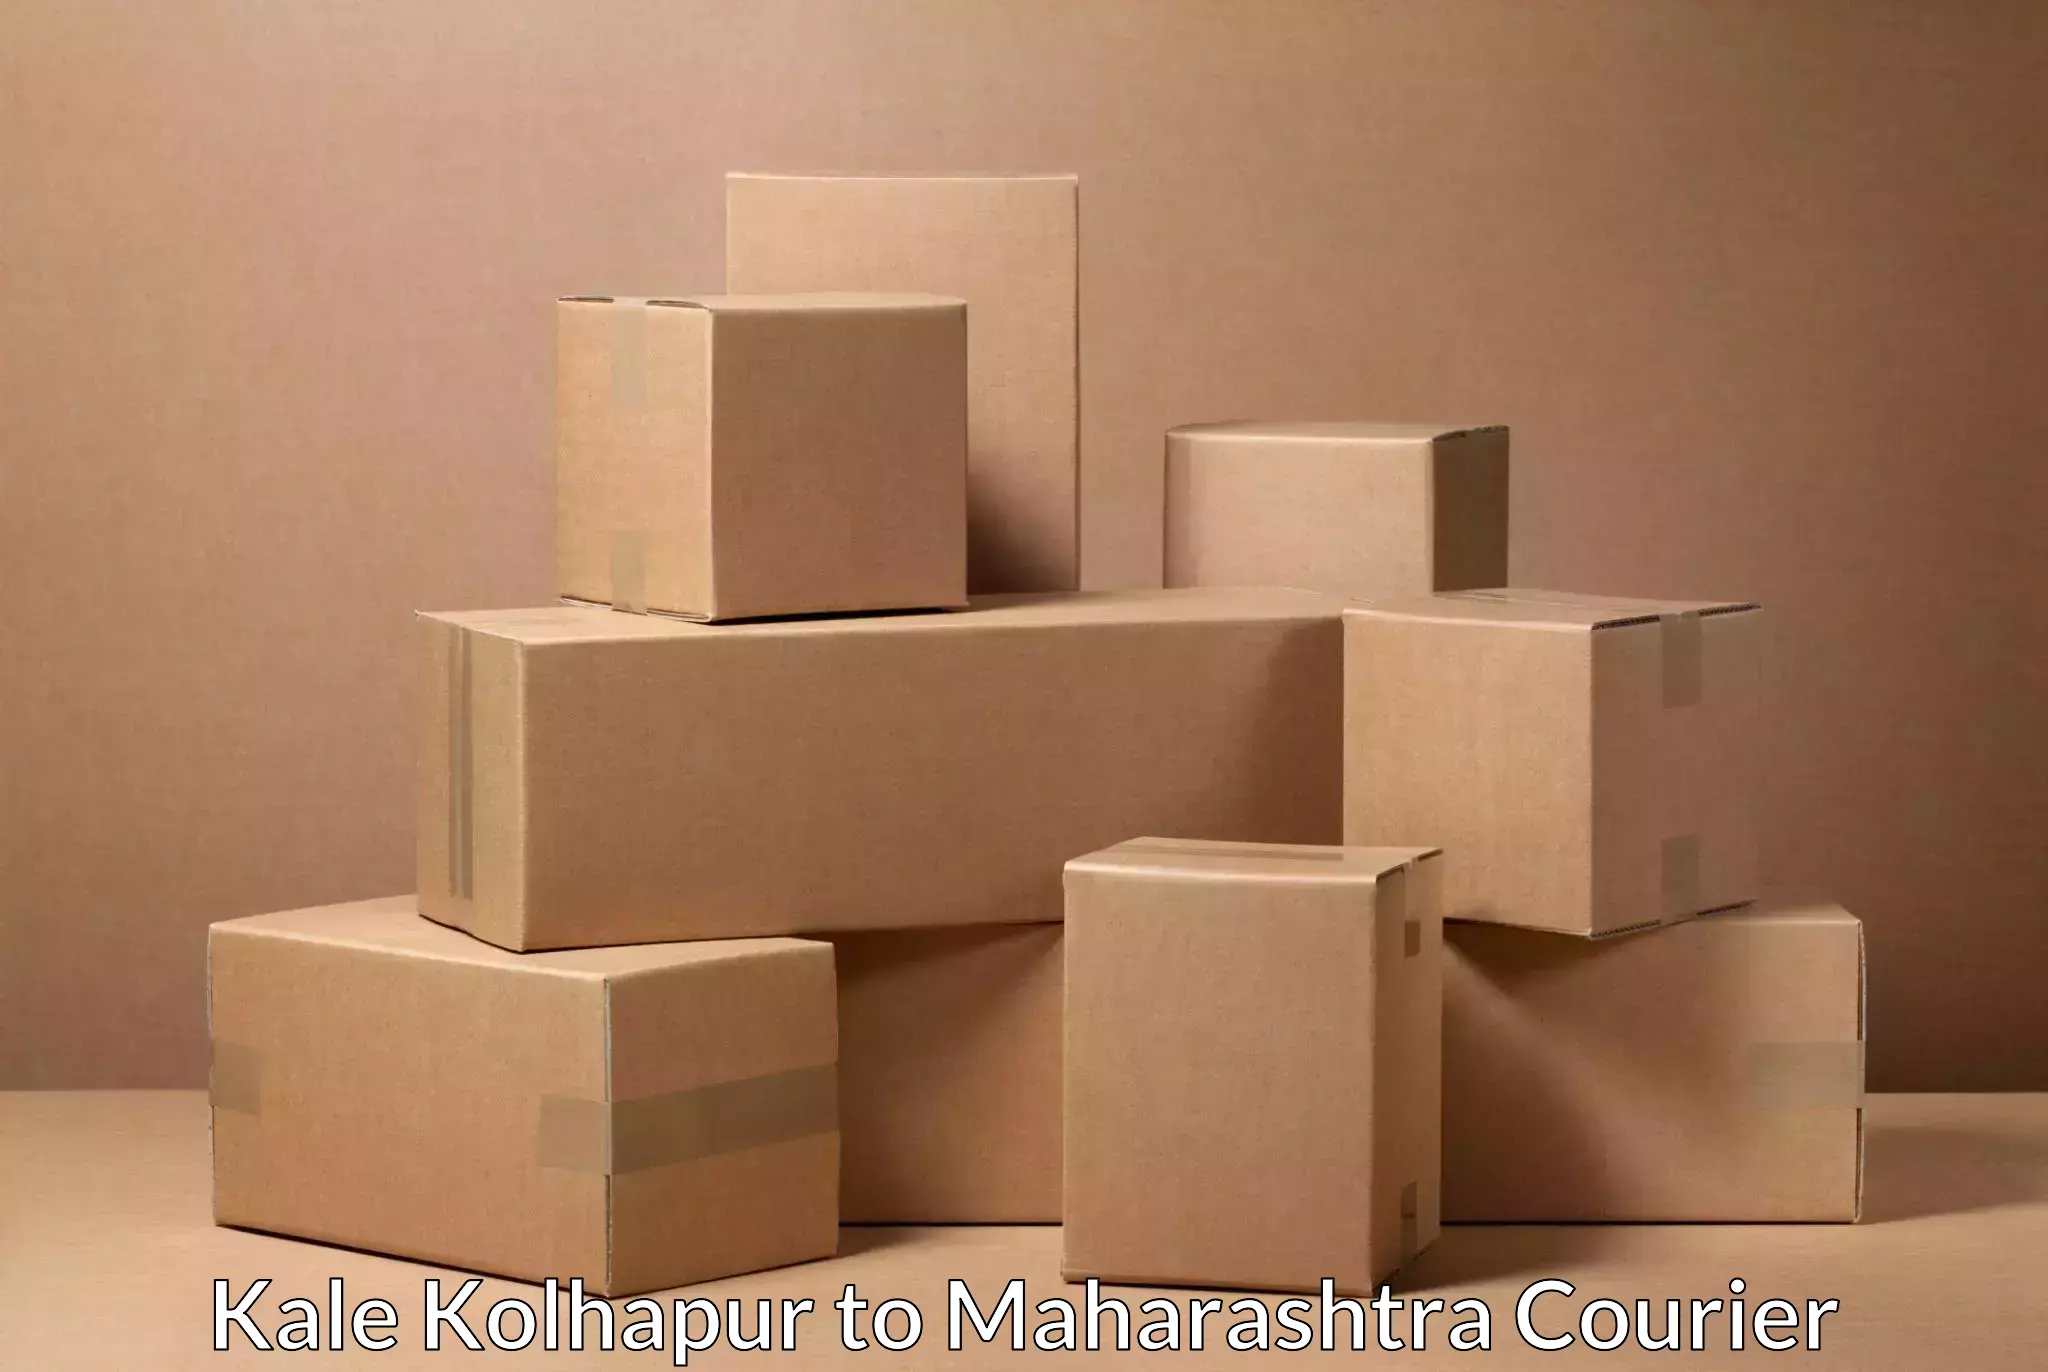 Professional courier services Kale Kolhapur to Andheri